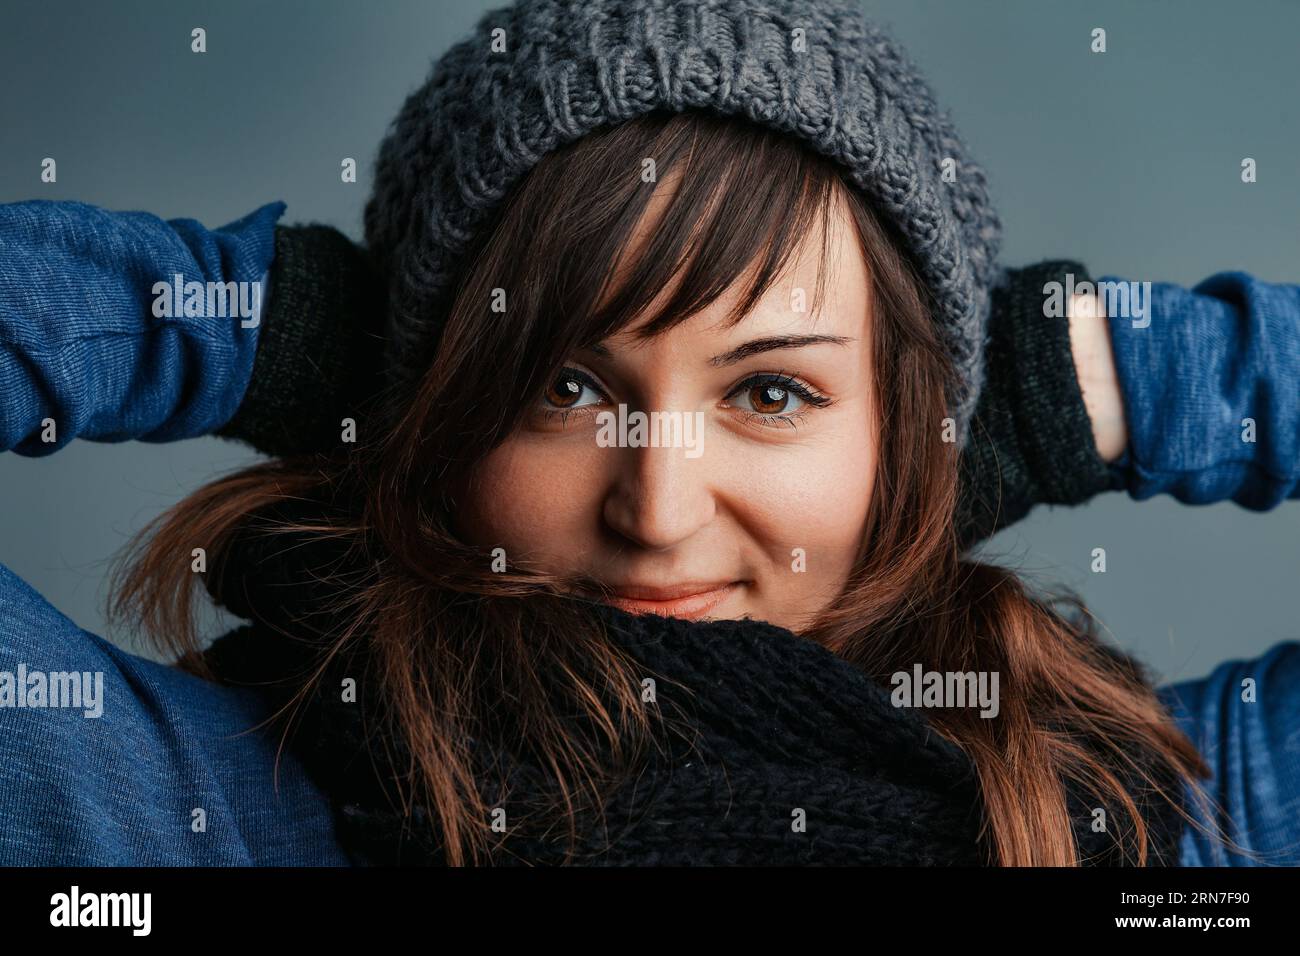 Regardless of the chill, a woman with long brown hair and vibrant eyes enjoys her winter outfits: wool gloves, scarf, and cozy jumpers Stock Photo